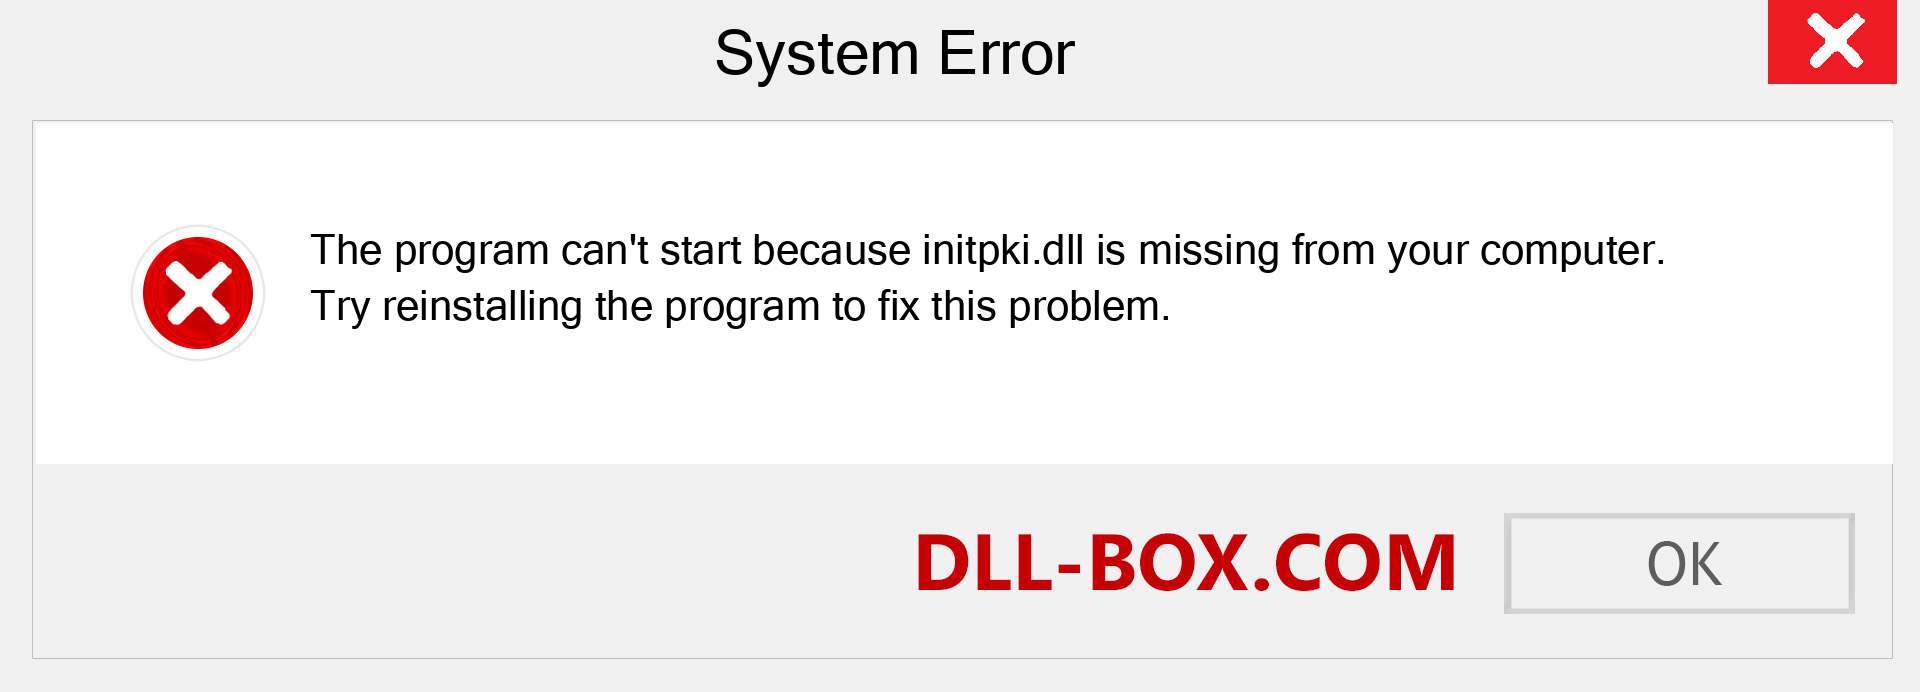  initpki.dll file is missing?. Download for Windows 7, 8, 10 - Fix  initpki dll Missing Error on Windows, photos, images